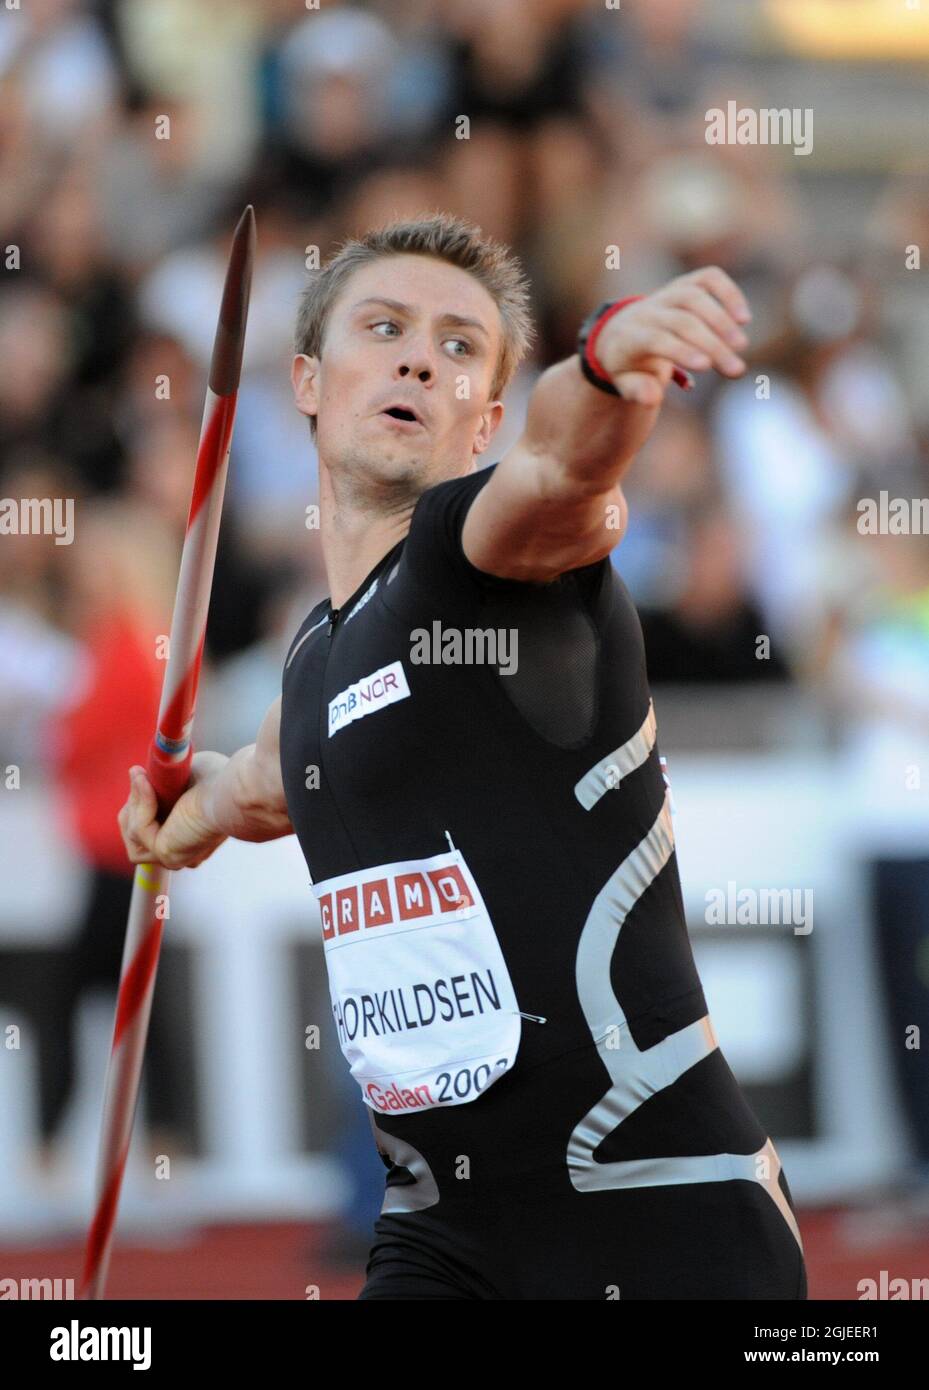 Andreas Thorkildsen of Norway during the men's javelin at DN Galan Super Grand Prix in athletics at Stockholm Olympic Stadium. Stock Photo